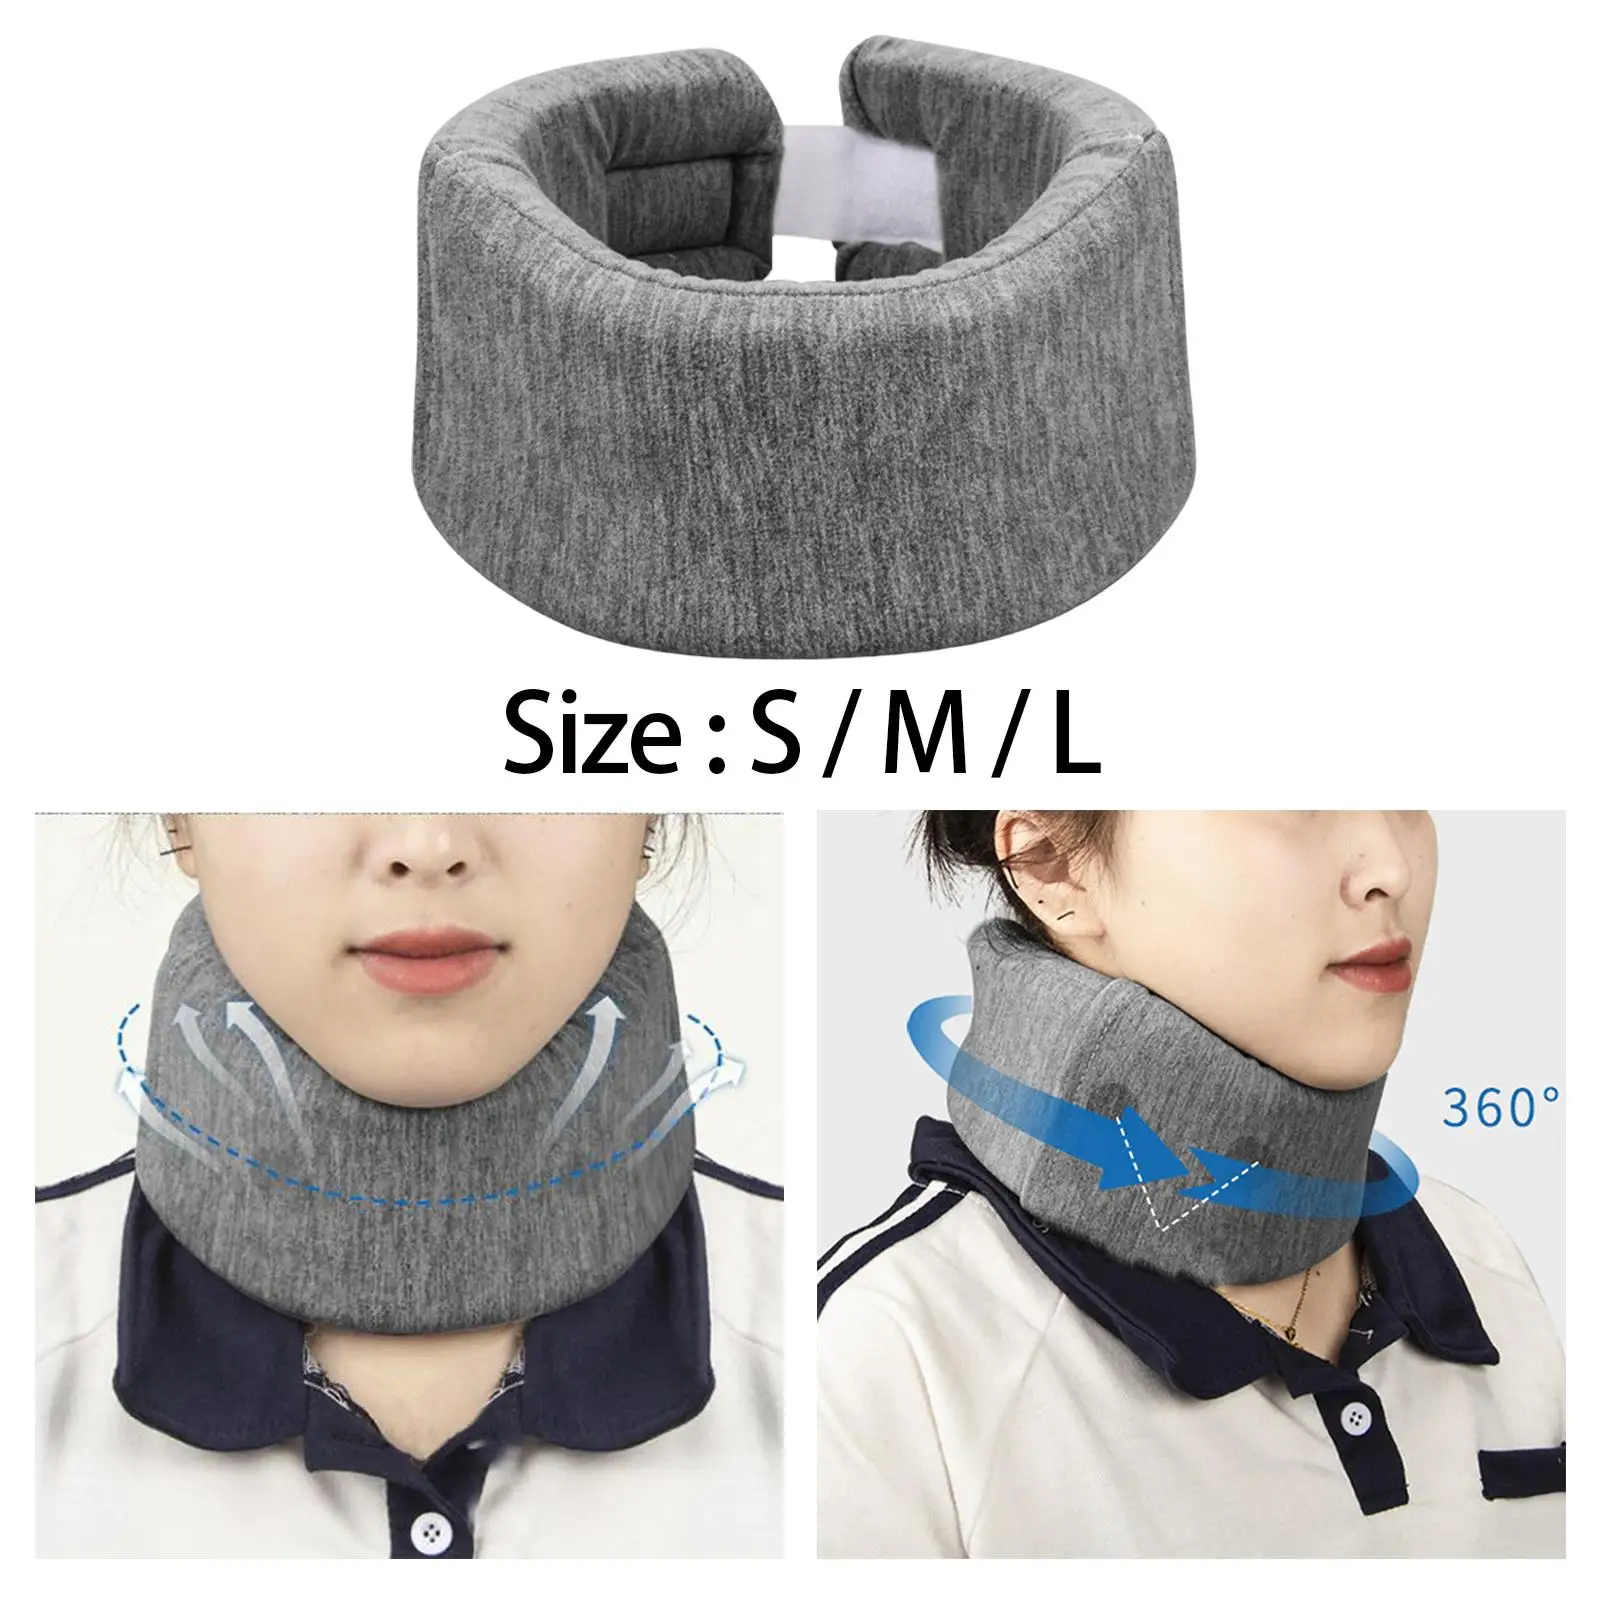 Travel Pillow Travel Essentials Breathable Ergonomic Durable Neck Pillow for Car Travel Plane Airplane Neck Support Adult